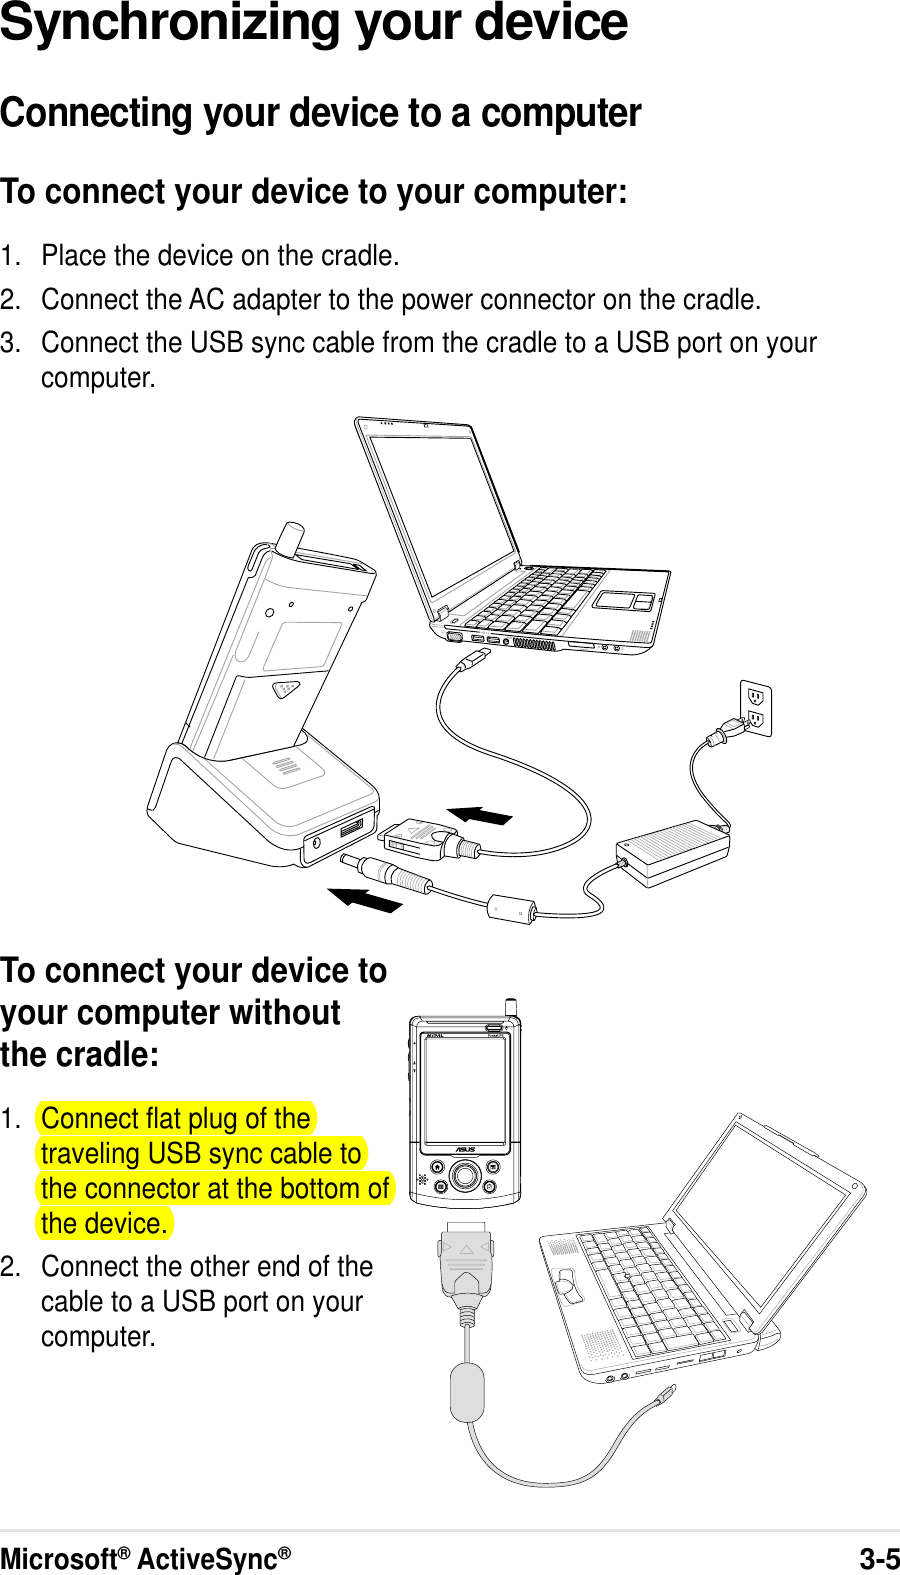 Microsoft® ActiveSync®3-5Synchronizing your deviceConnecting your device to a computerTo connect your device to your computer:1. Place the device on the cradle.2. Connect the AC adapter to the power connector on the cradle.3. Connect the USB sync cable from the cradle to a USB port on yourcomputer.To connect your device toyour computer withoutthe cradle:1. Connect flat plug of thetraveling USB sync cable tothe connector at the bottom ofthe device.2. Connect the other end of thecable to a USB port on yourcomputer.